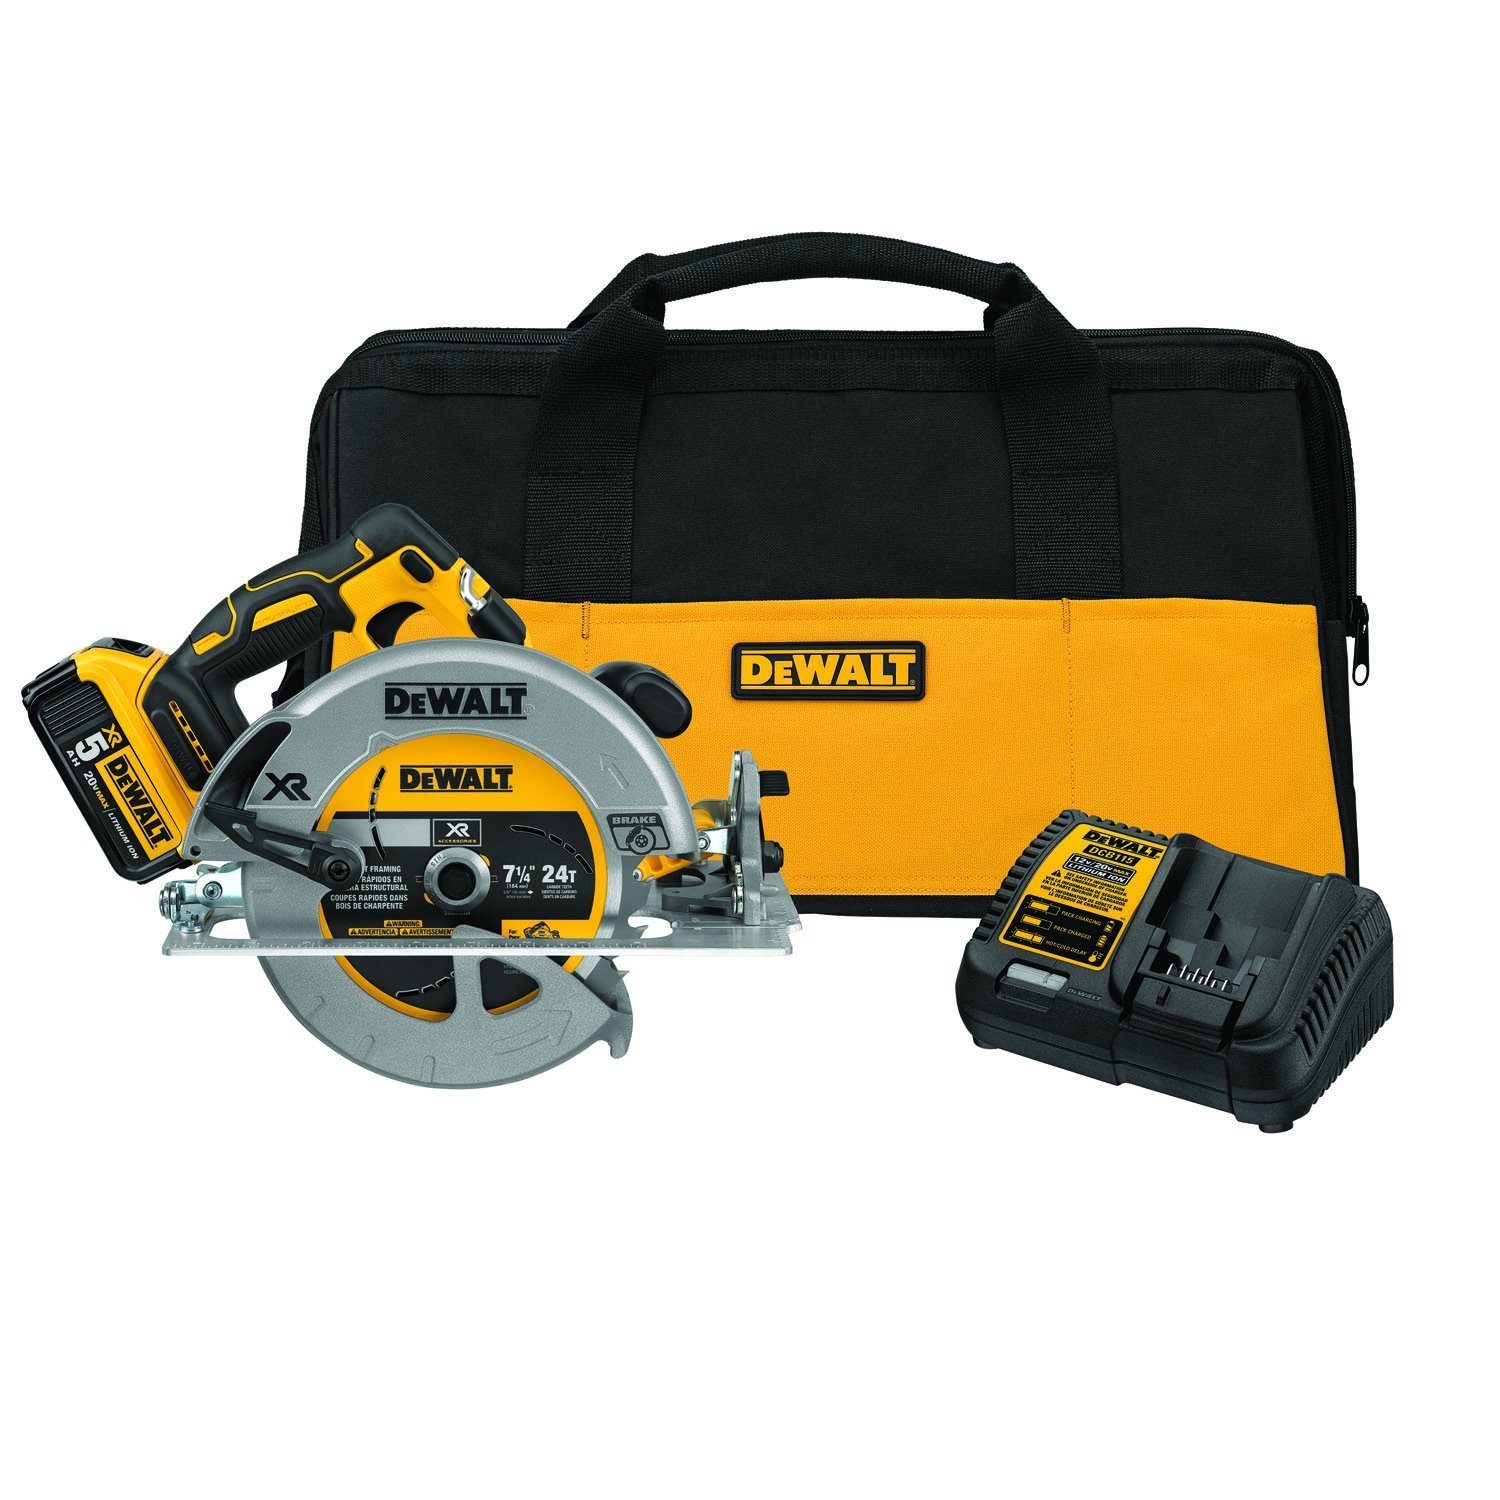 20V MAX 7-1/4 IN. BRUSHLESS XR CIRCULAR SAW KIT WITH 5.0 AH BATTERY